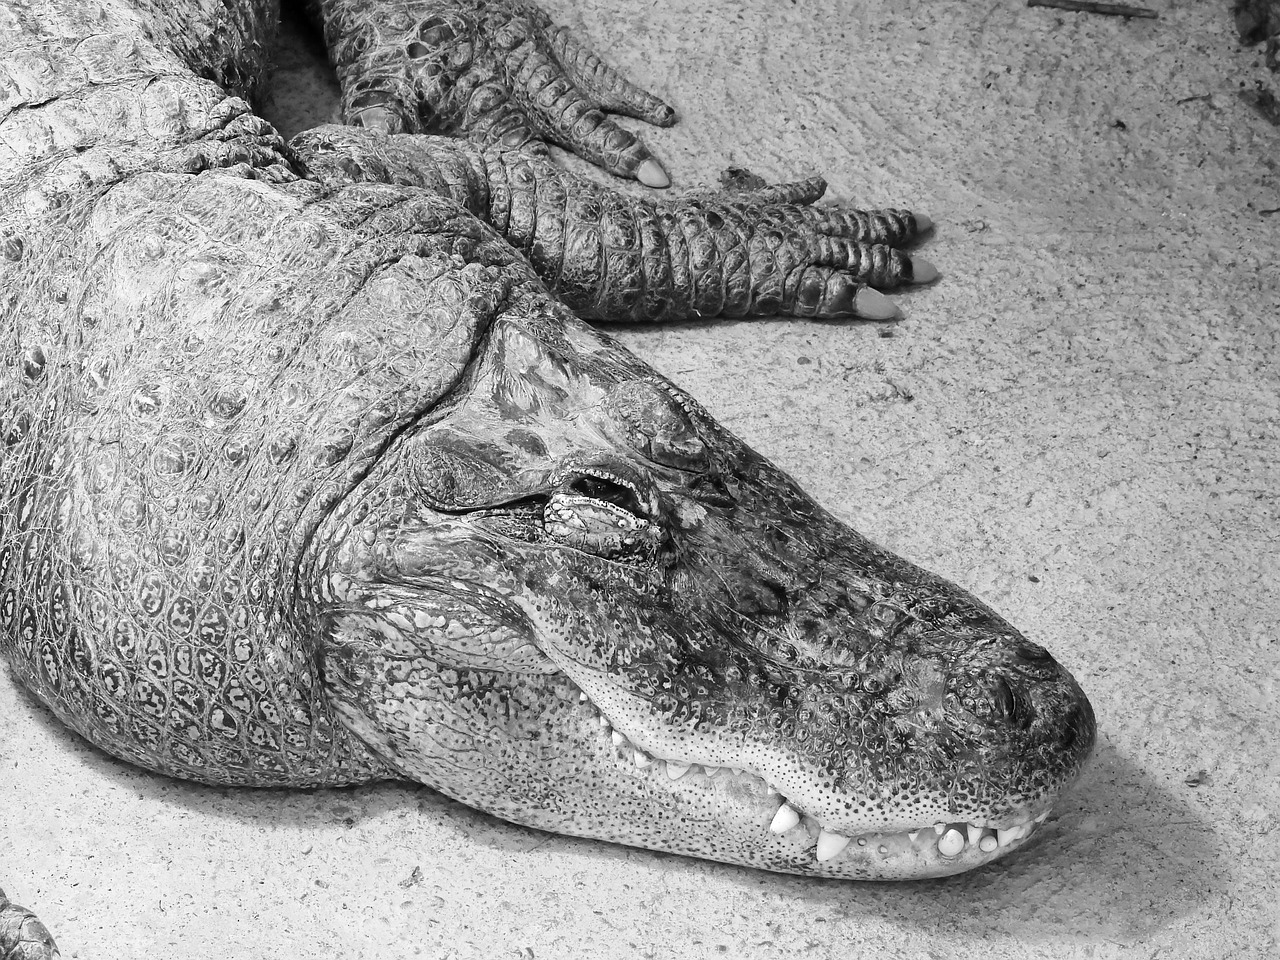 a black and white photo of a large alligator, a black and white photo, tired face, wrinkled skin, platypus, instagram photo